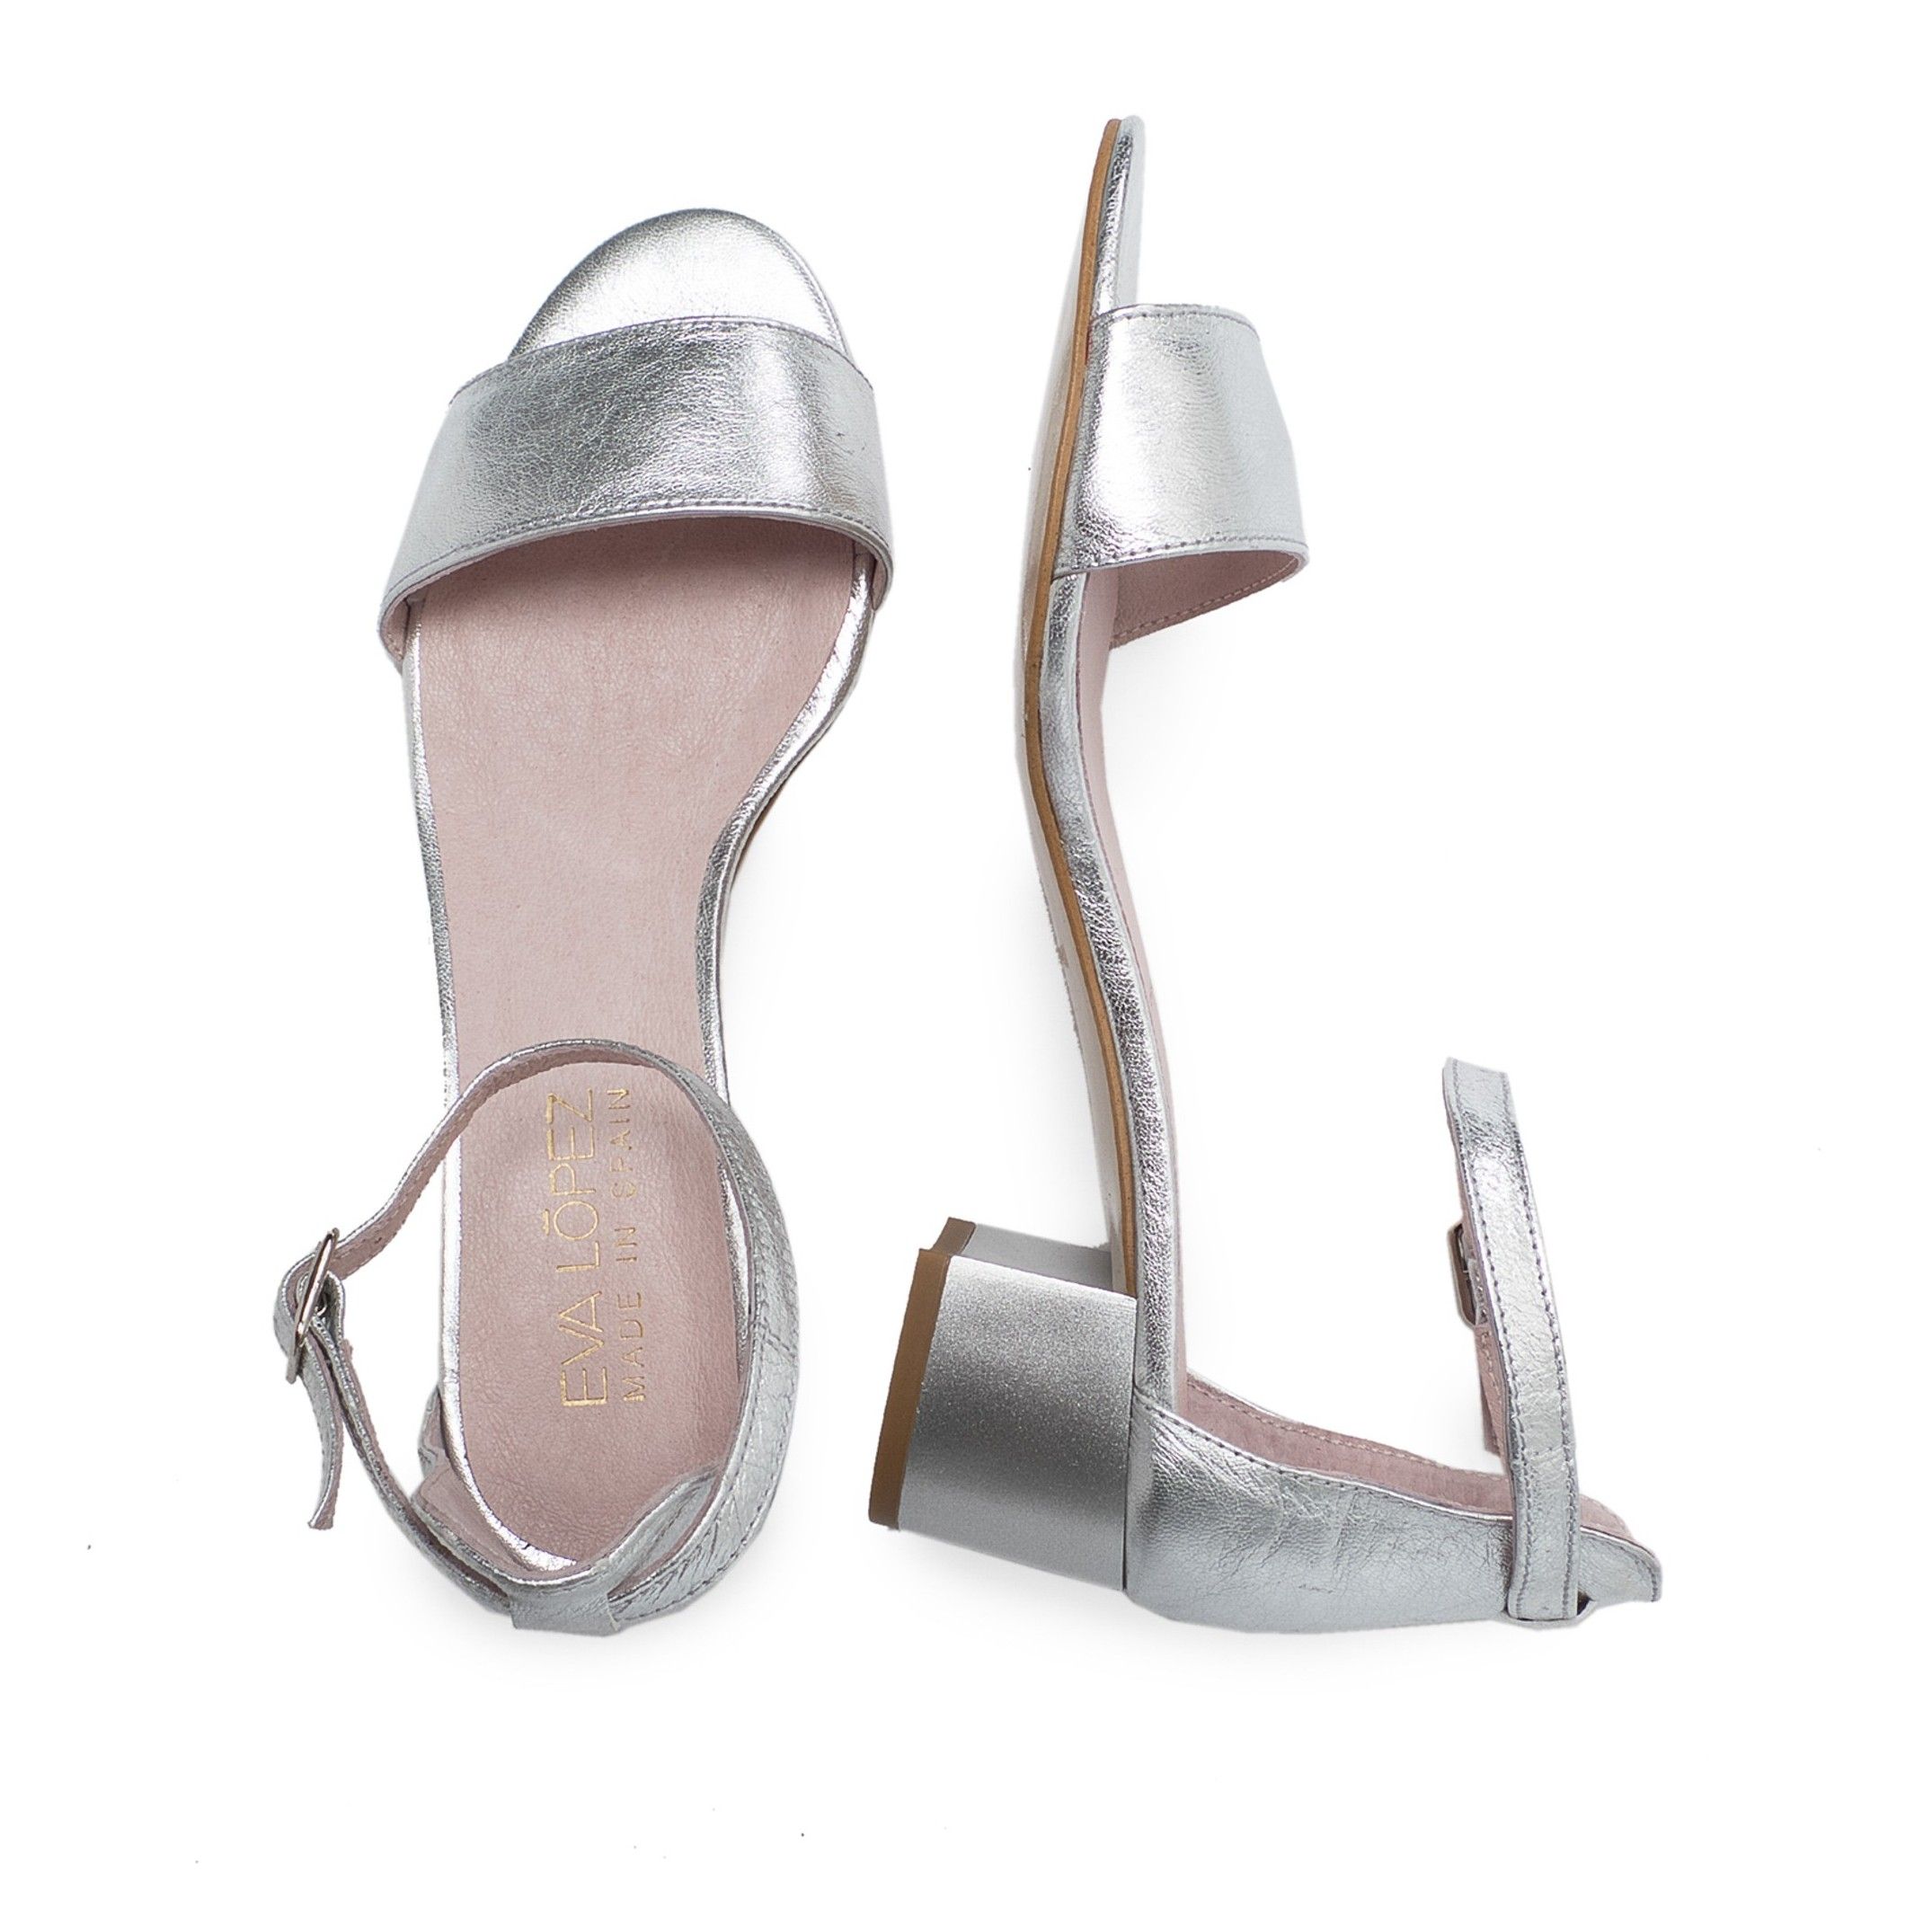 Classic sandals with heel for women. By Eva Lopez. Upper: goat leather. Closure: Metal buckle. Inner lining and insole: pig lining. Sole material: Cuerolite. Heel height: 4.5 cm. Designed and manufactured in Spain.